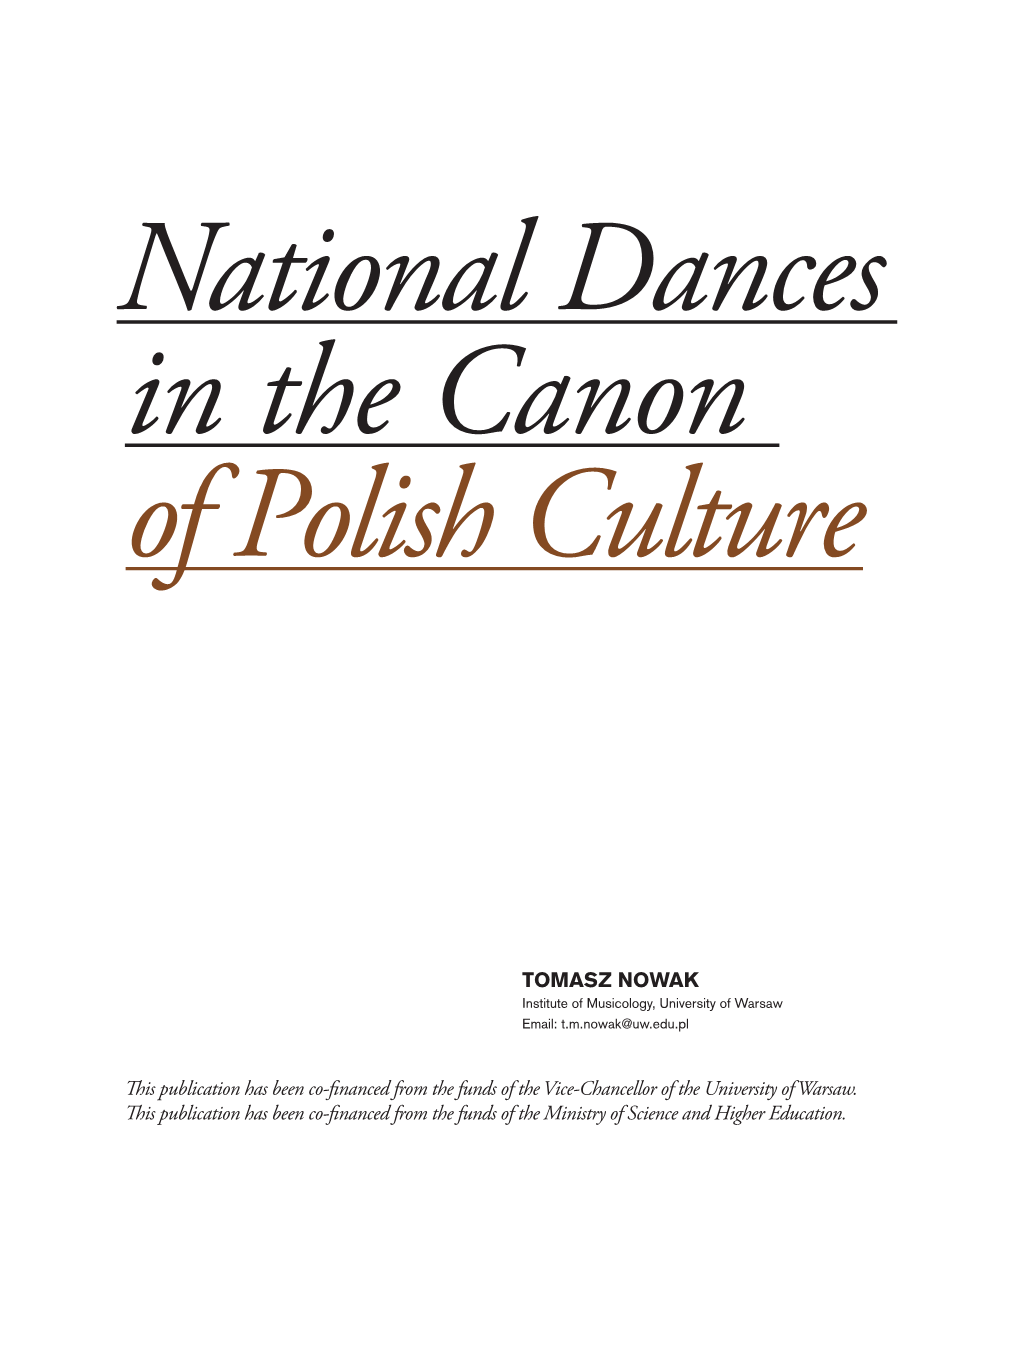 Tomasz Nowak This Publication Has Been Co-Financed from the Funds Of